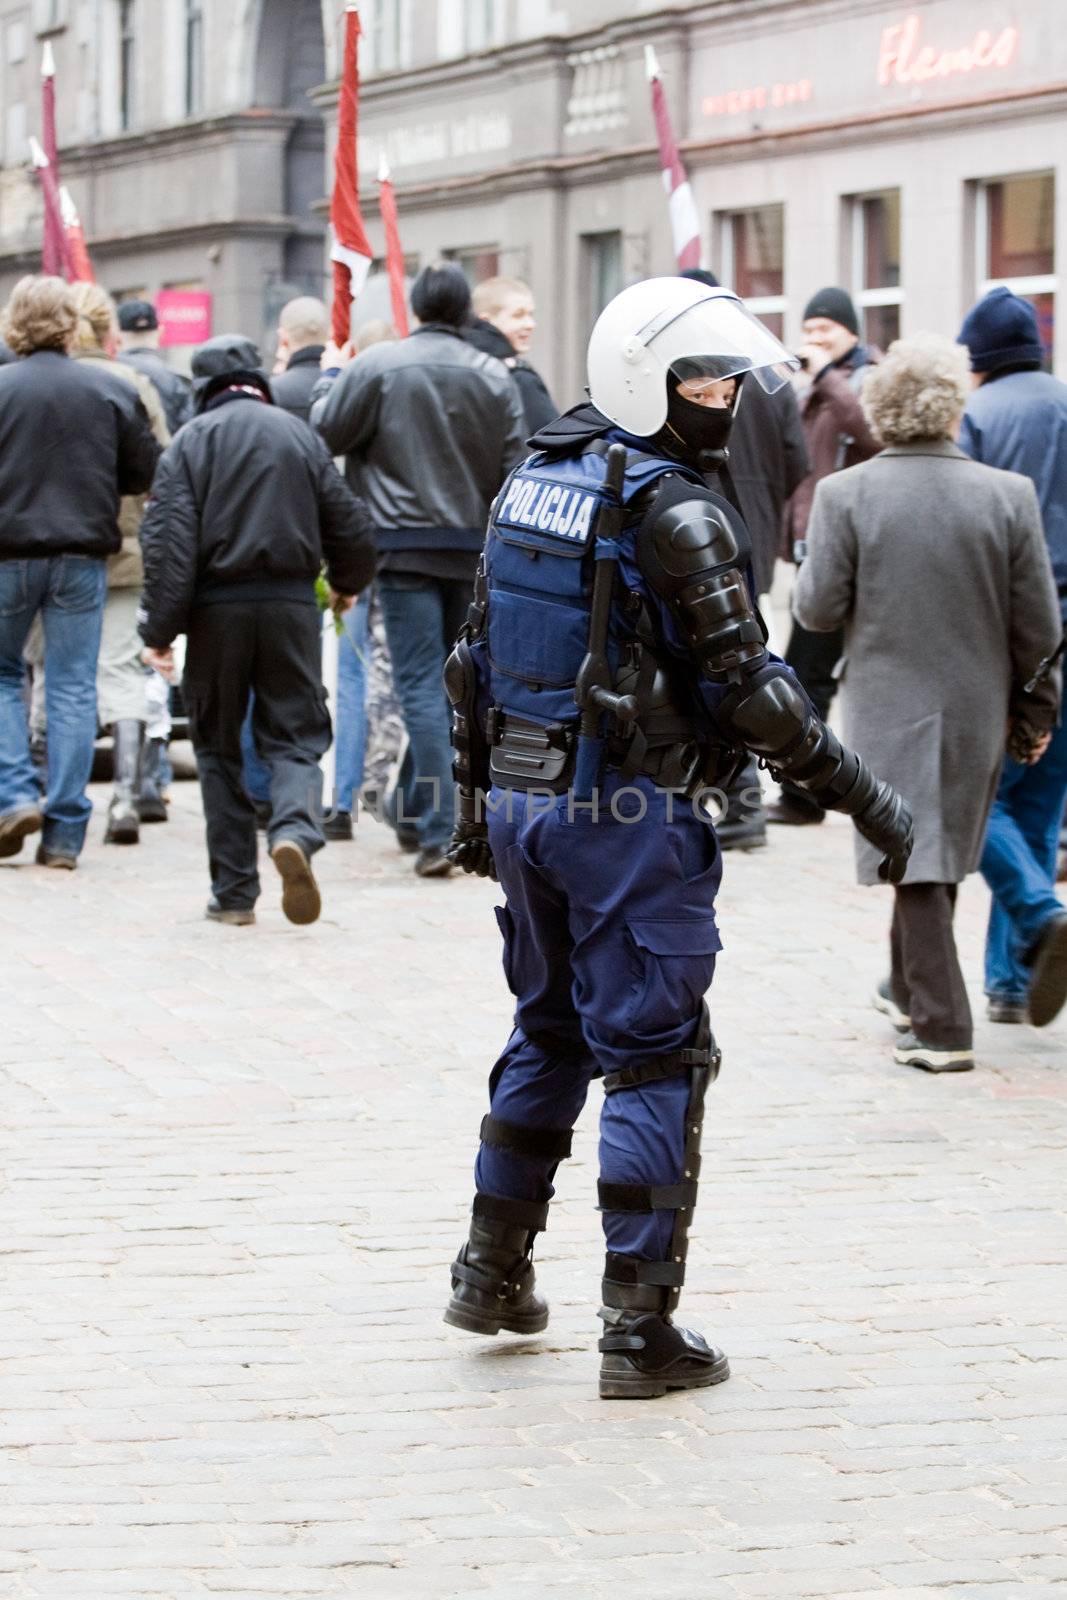 Riga, Latvia, March 16, 2009. Riot police observing Commemoration of the Latvian Waffen SS unit or Legionnaires.The event is always drawing crowds of nationalist supporters and anti-fascist demonstrators. Many Latvians legionnaires were forcibly called uo to join the Latvian SS Legion.